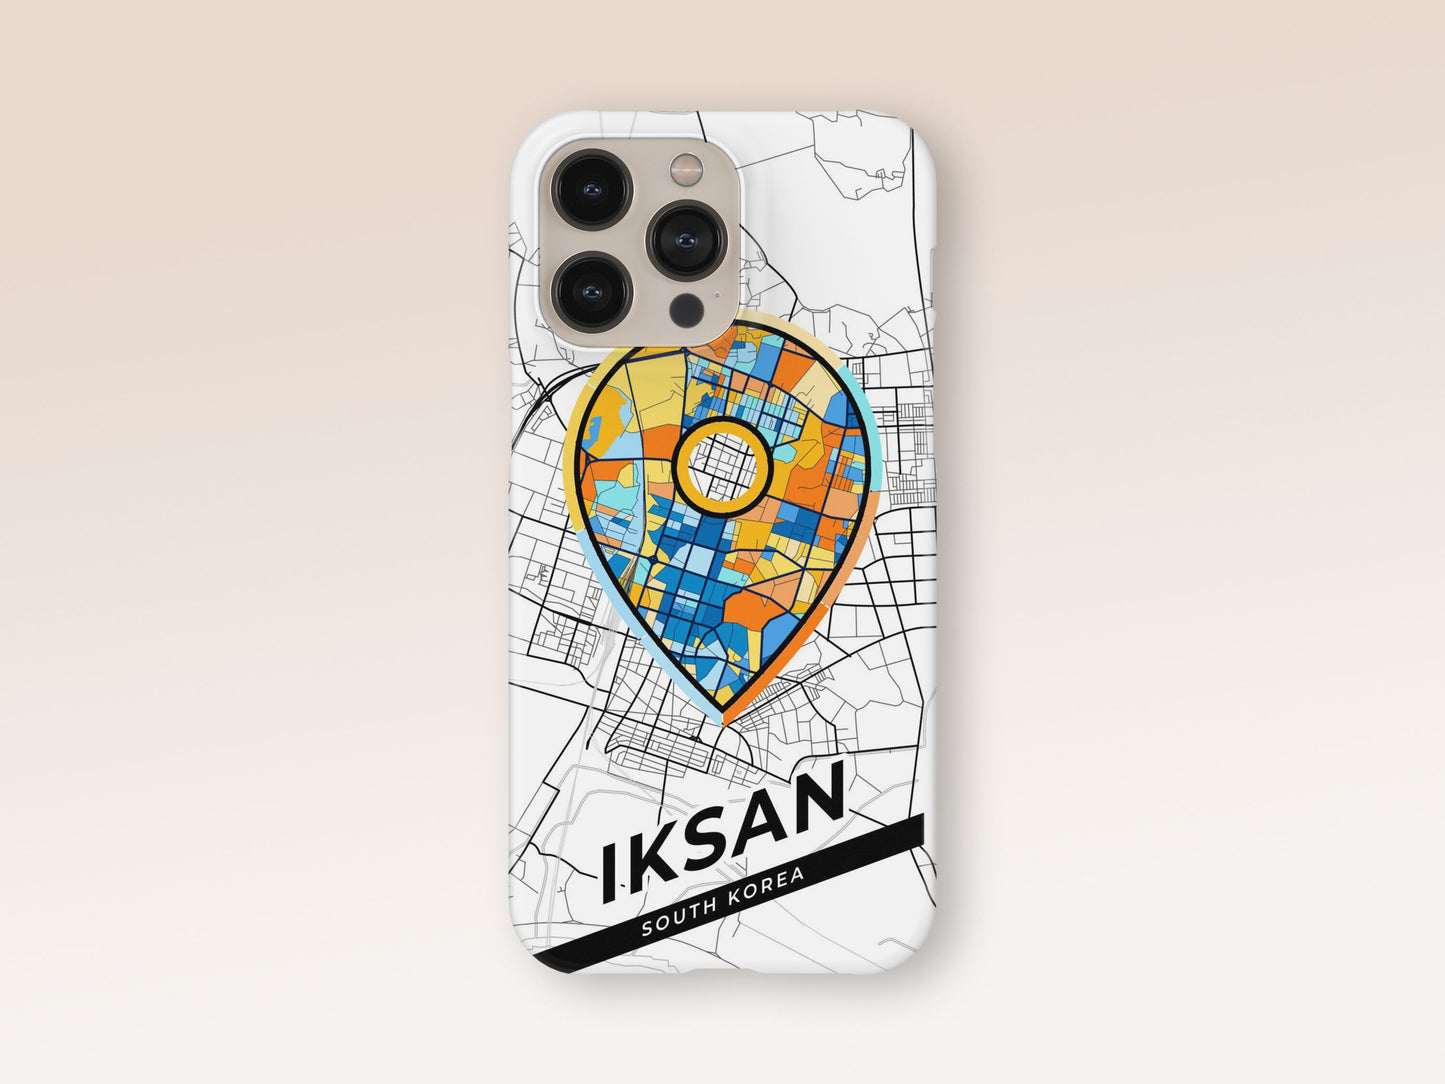 Iksan South Korea slim phone case with colorful icon. Birthday, wedding or housewarming gift. Couple match cases. 1